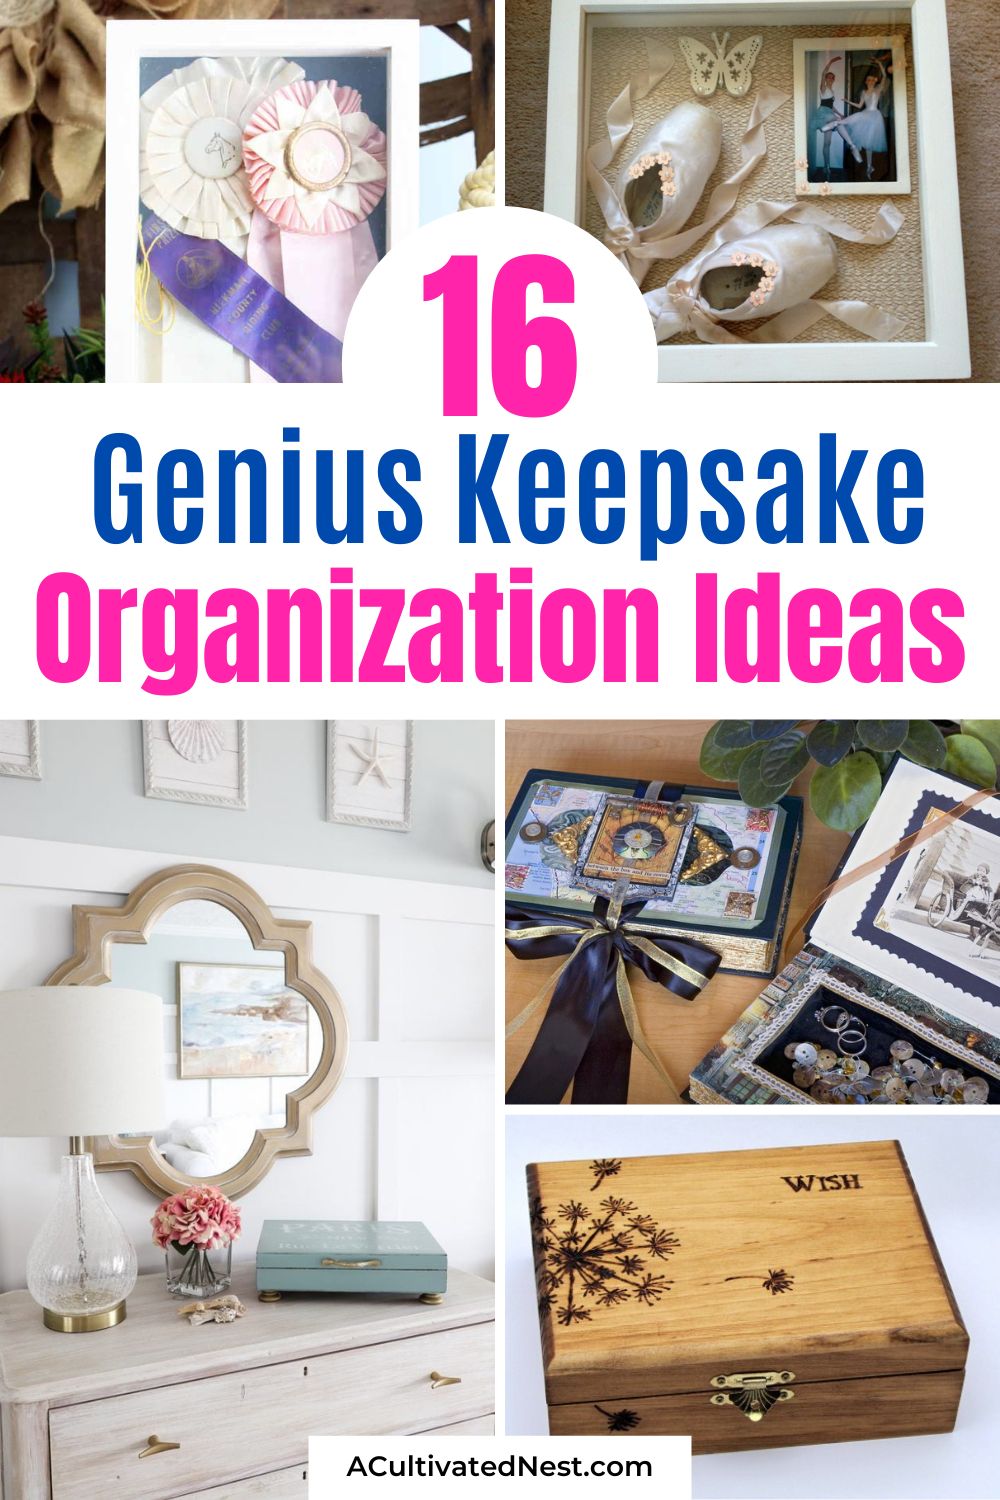 16 Genius Keepsake Organization Ideas- Transform clutter into cherished memories with these genius keepsake organization ideas! Whether it's shoes or pressed flowers, these clever solutions will help you preserve and display your mementos beautifully. Say goodbye to clutter and hello to organized nostalgia! | #OrganizationTips #Memorabilia #DIYProjects #keepsakes #ACultivatedNest